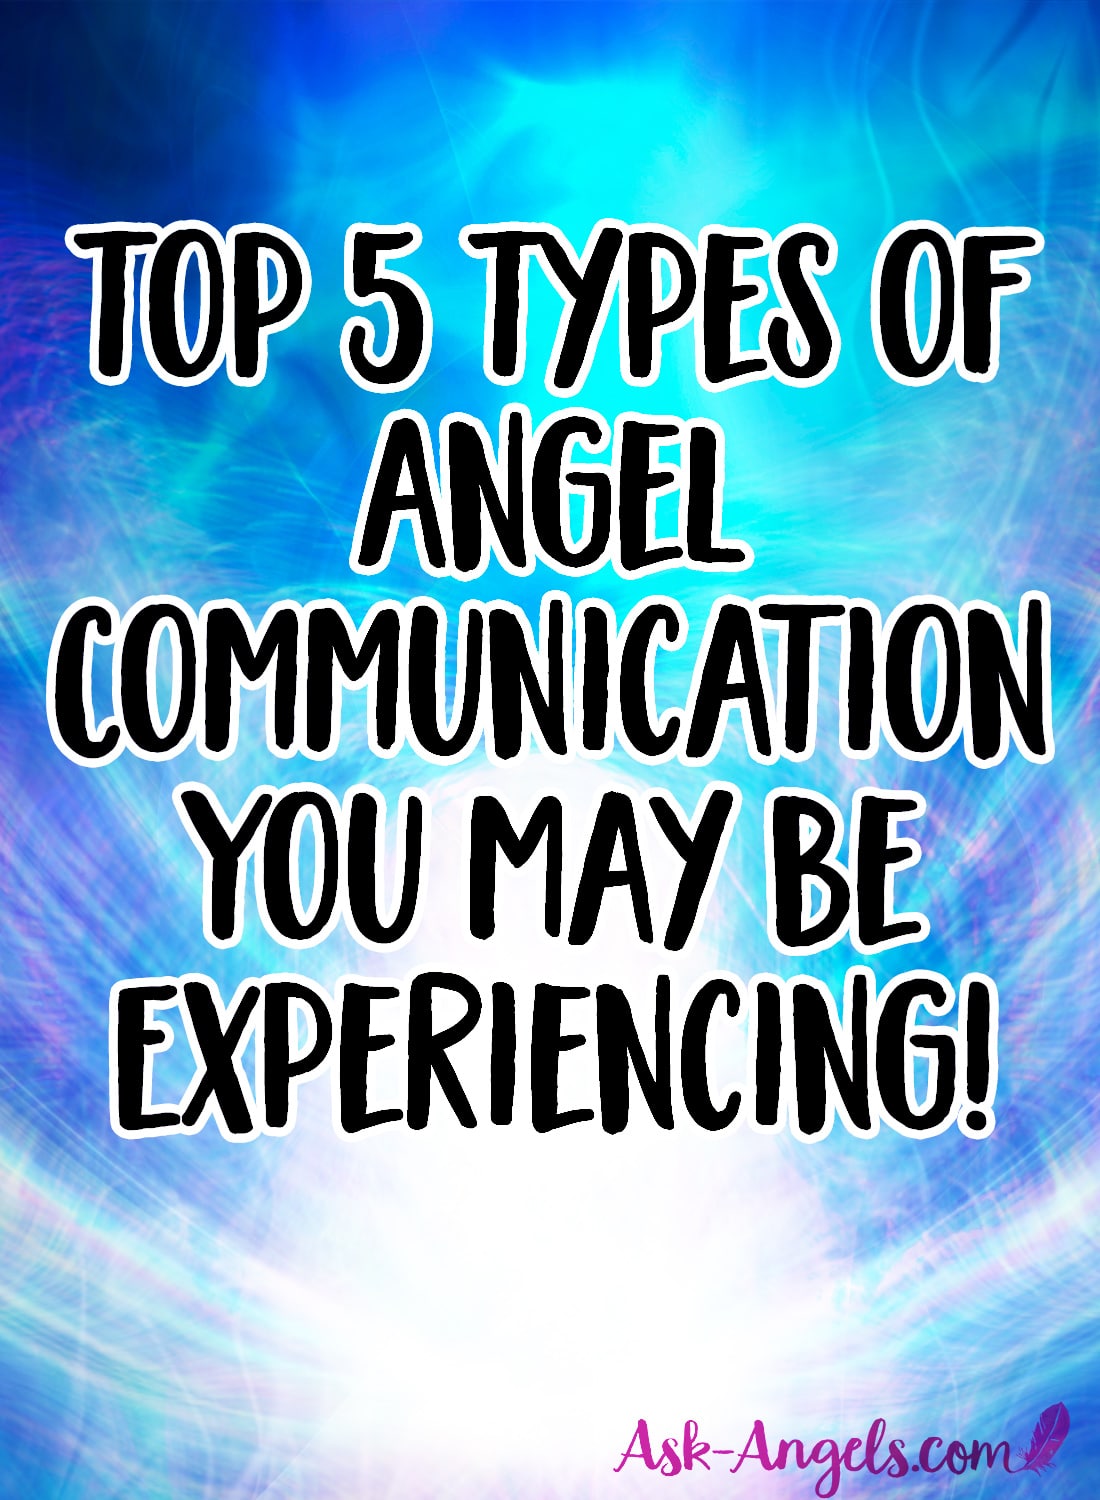 5 Types of Angel Communication You May Be Experiencing